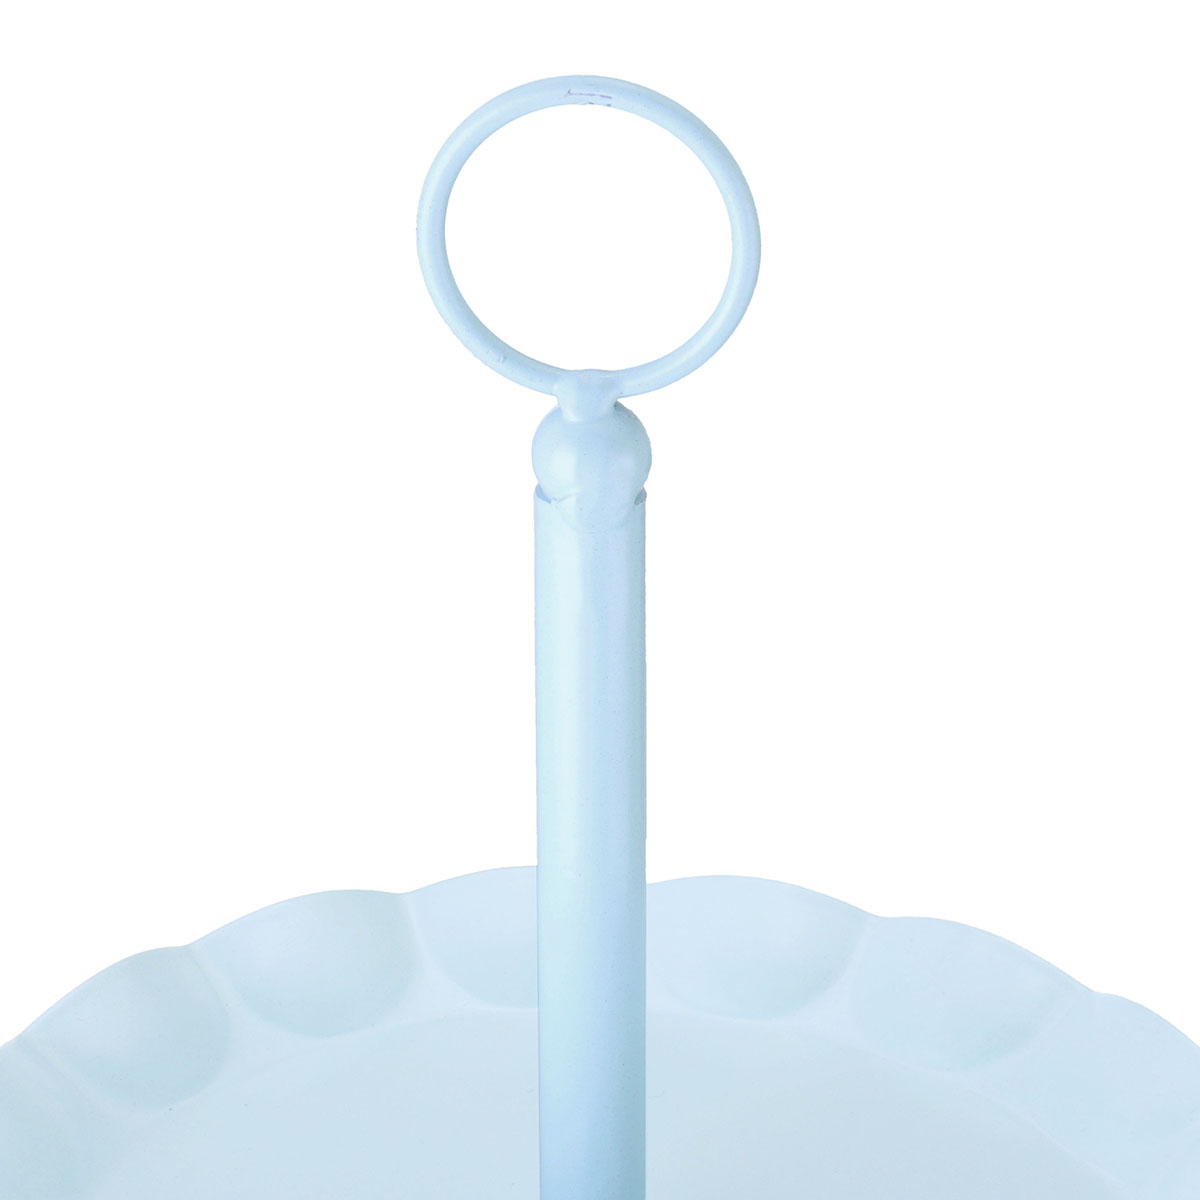 2--3-Ters-Blue-Cake-Holder-Cupcake-Stand-Birthday-Wedding-Party-Display-Holder-Decorations-1340743-10